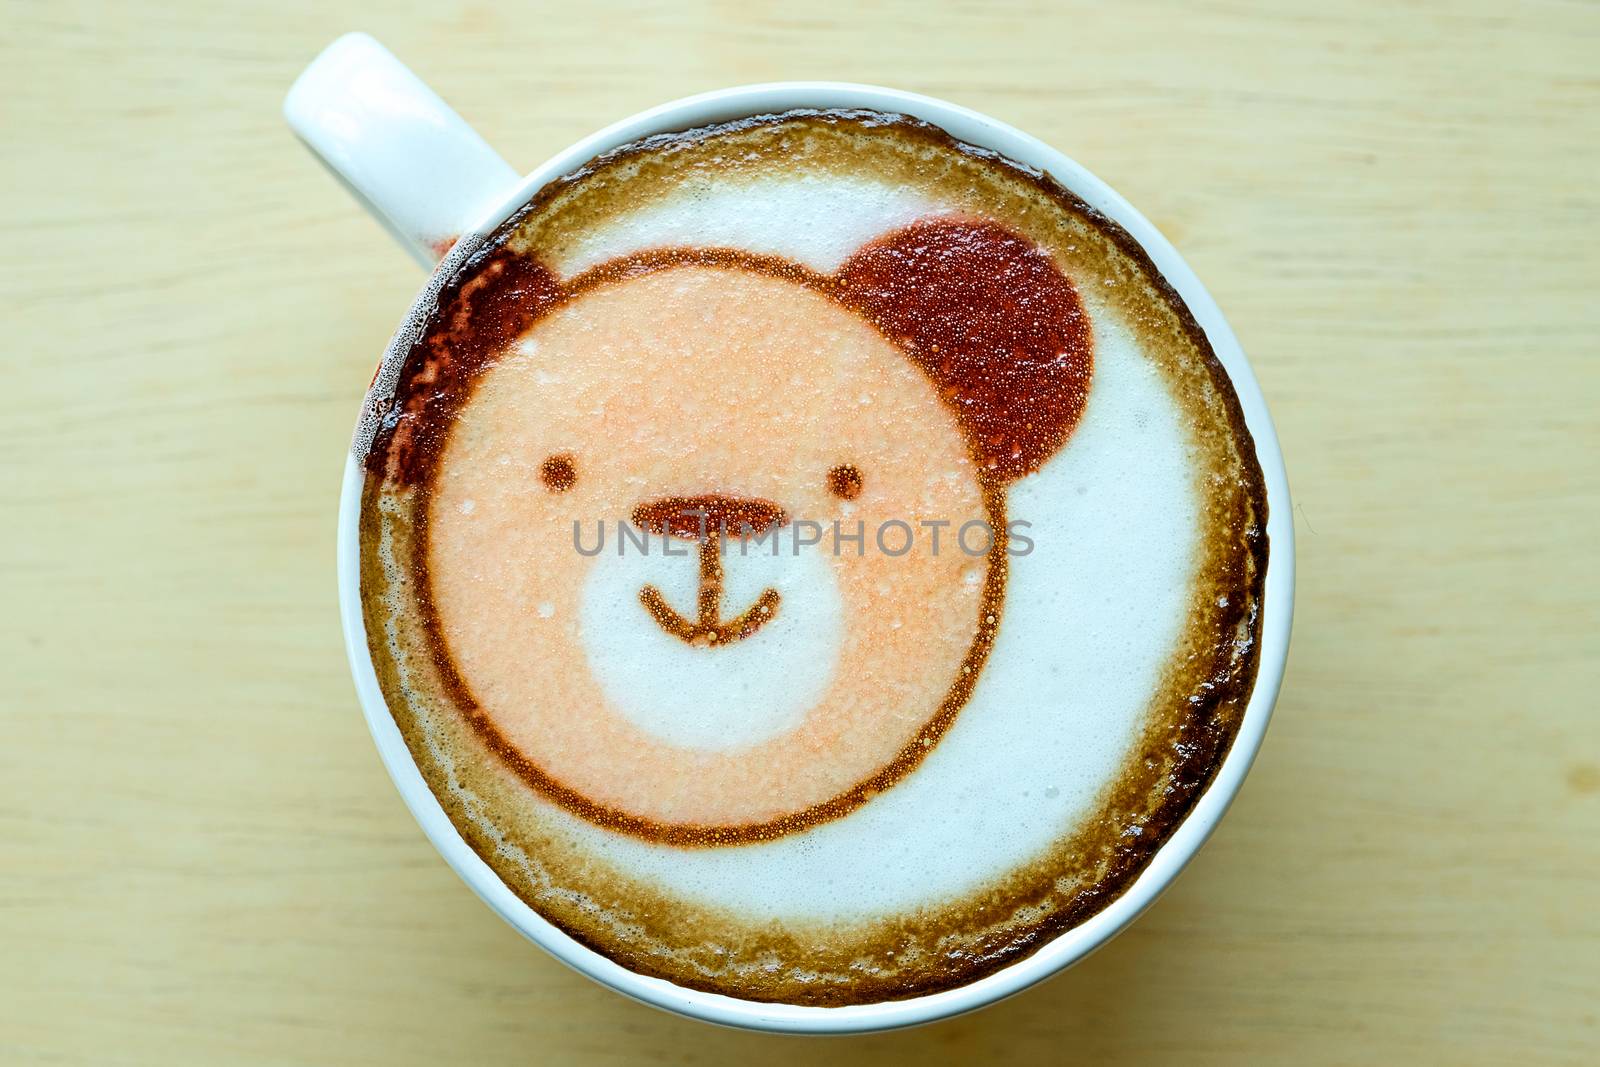 hot coffee in a white ceramic cup with cute bear face latte art, wooden background